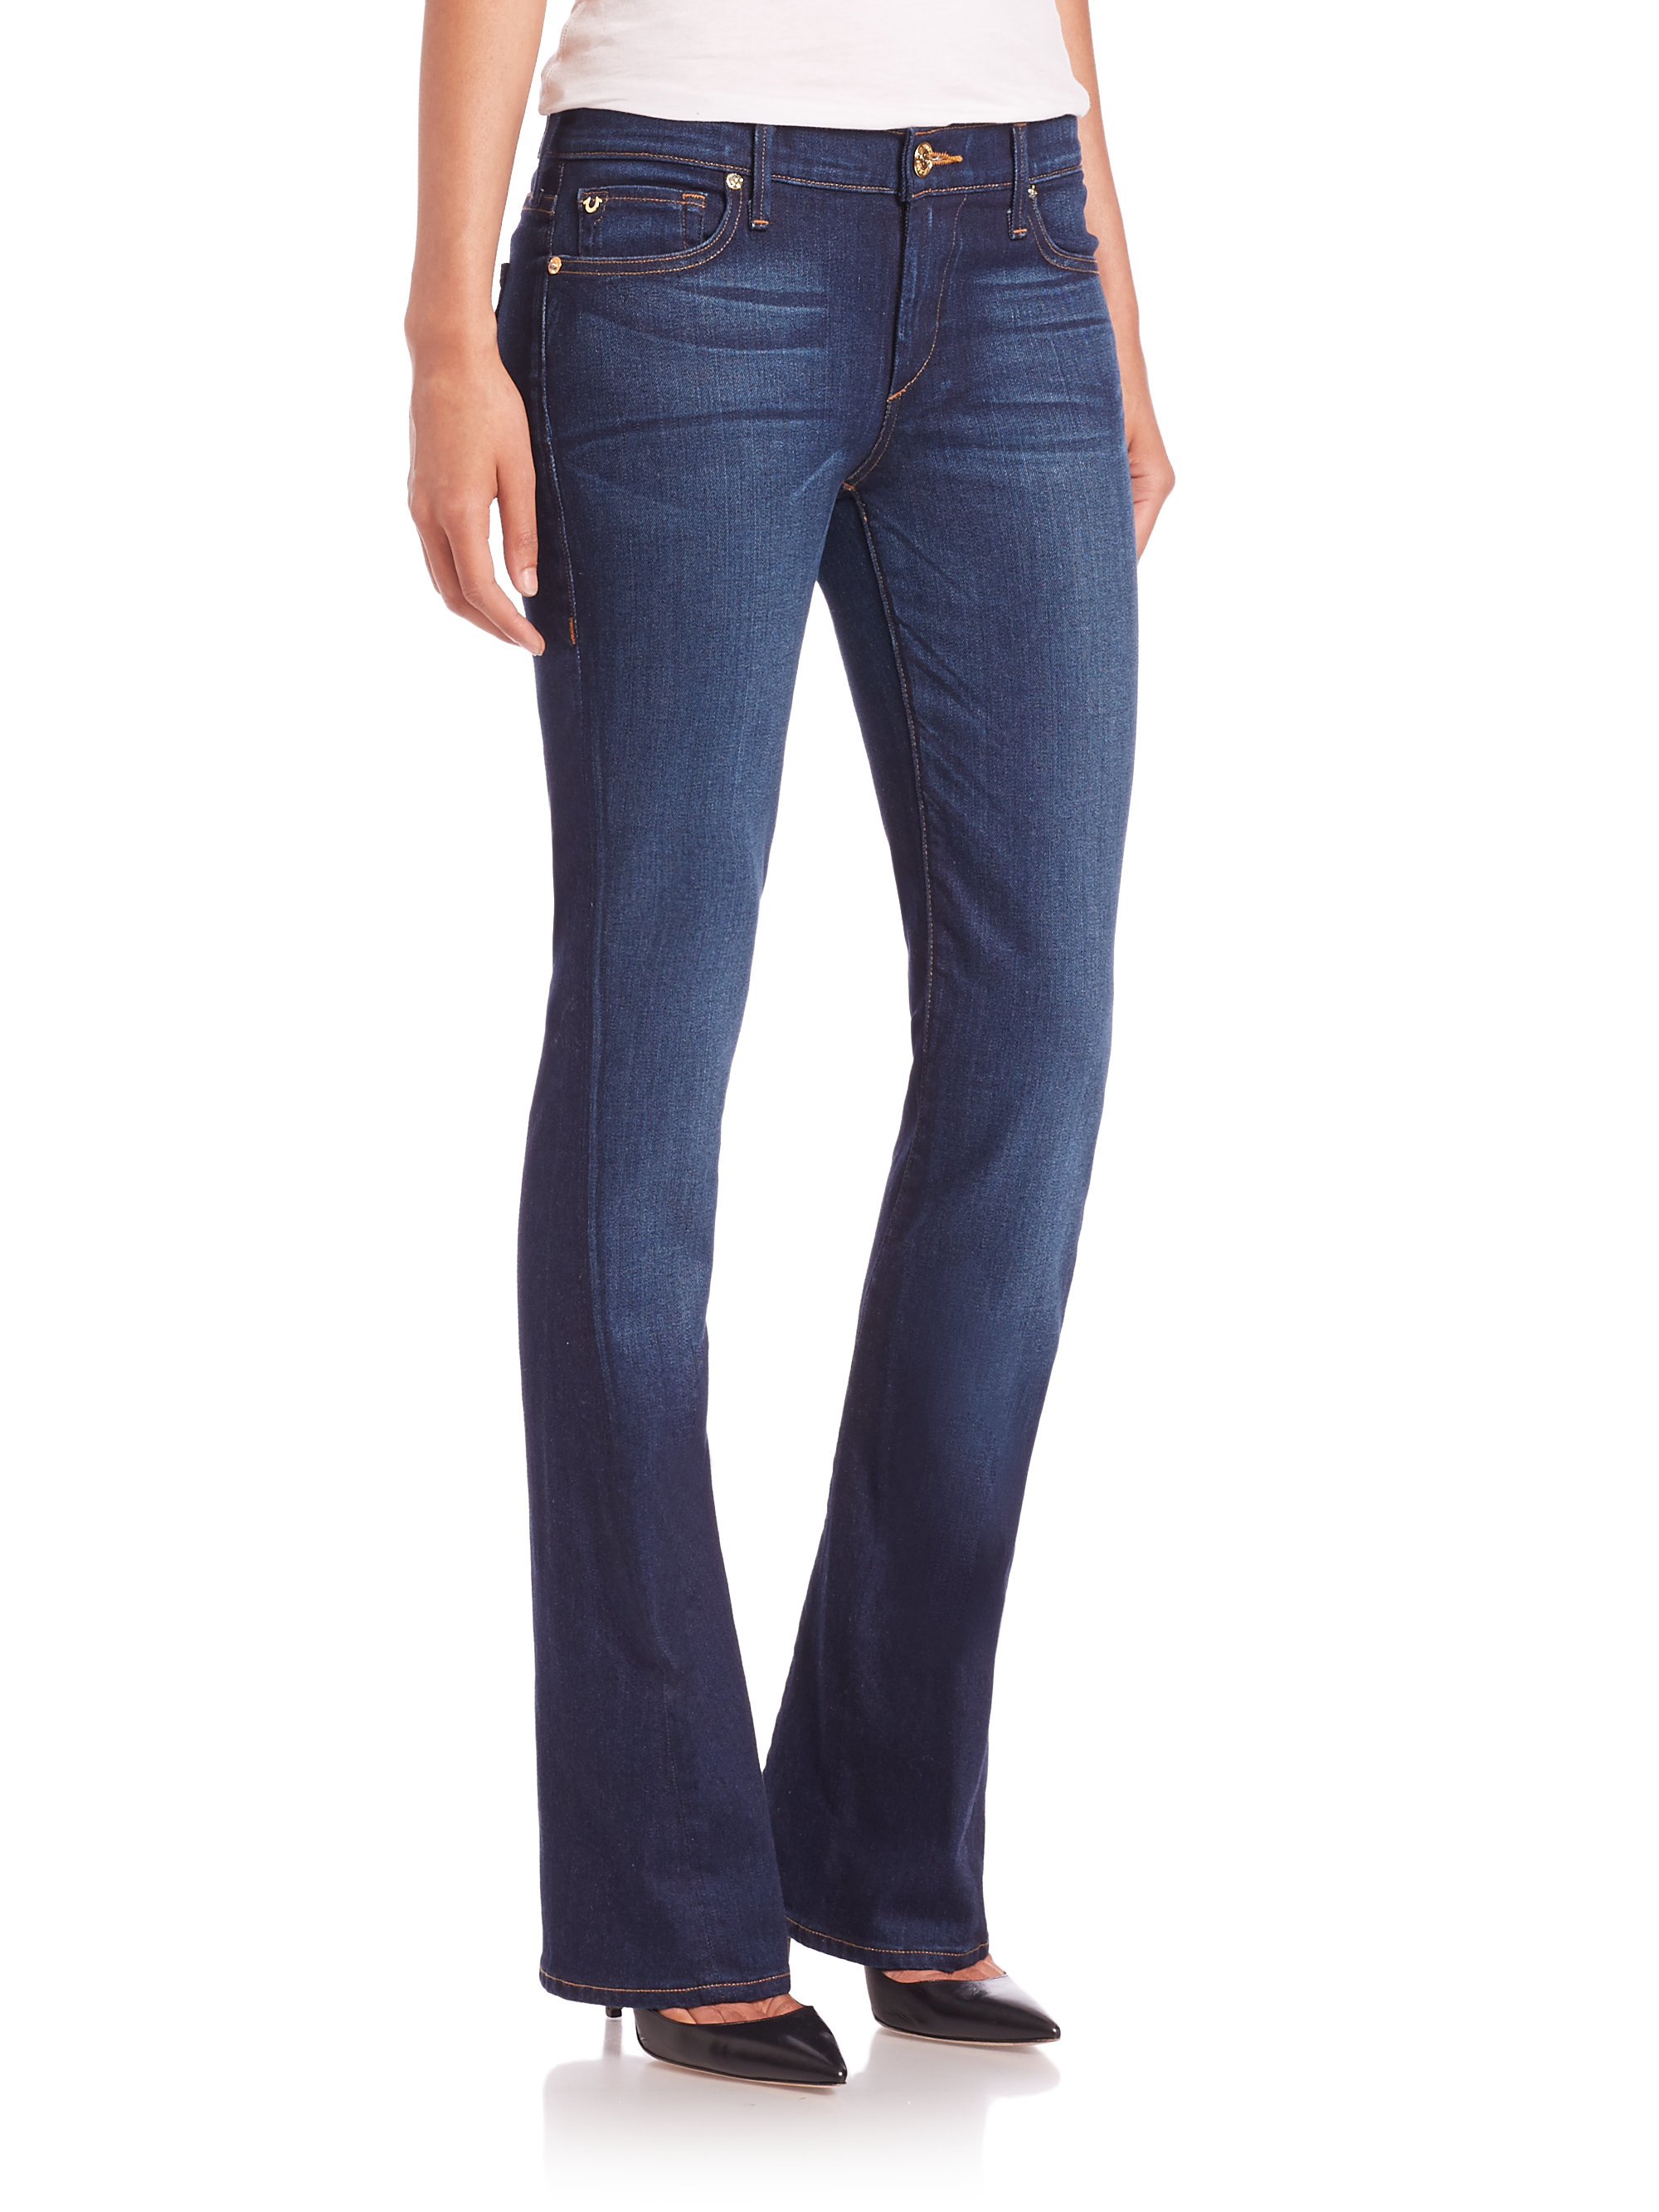 True Religion Becca Mid-rise Bootcut Jeans in Blue - Lyst